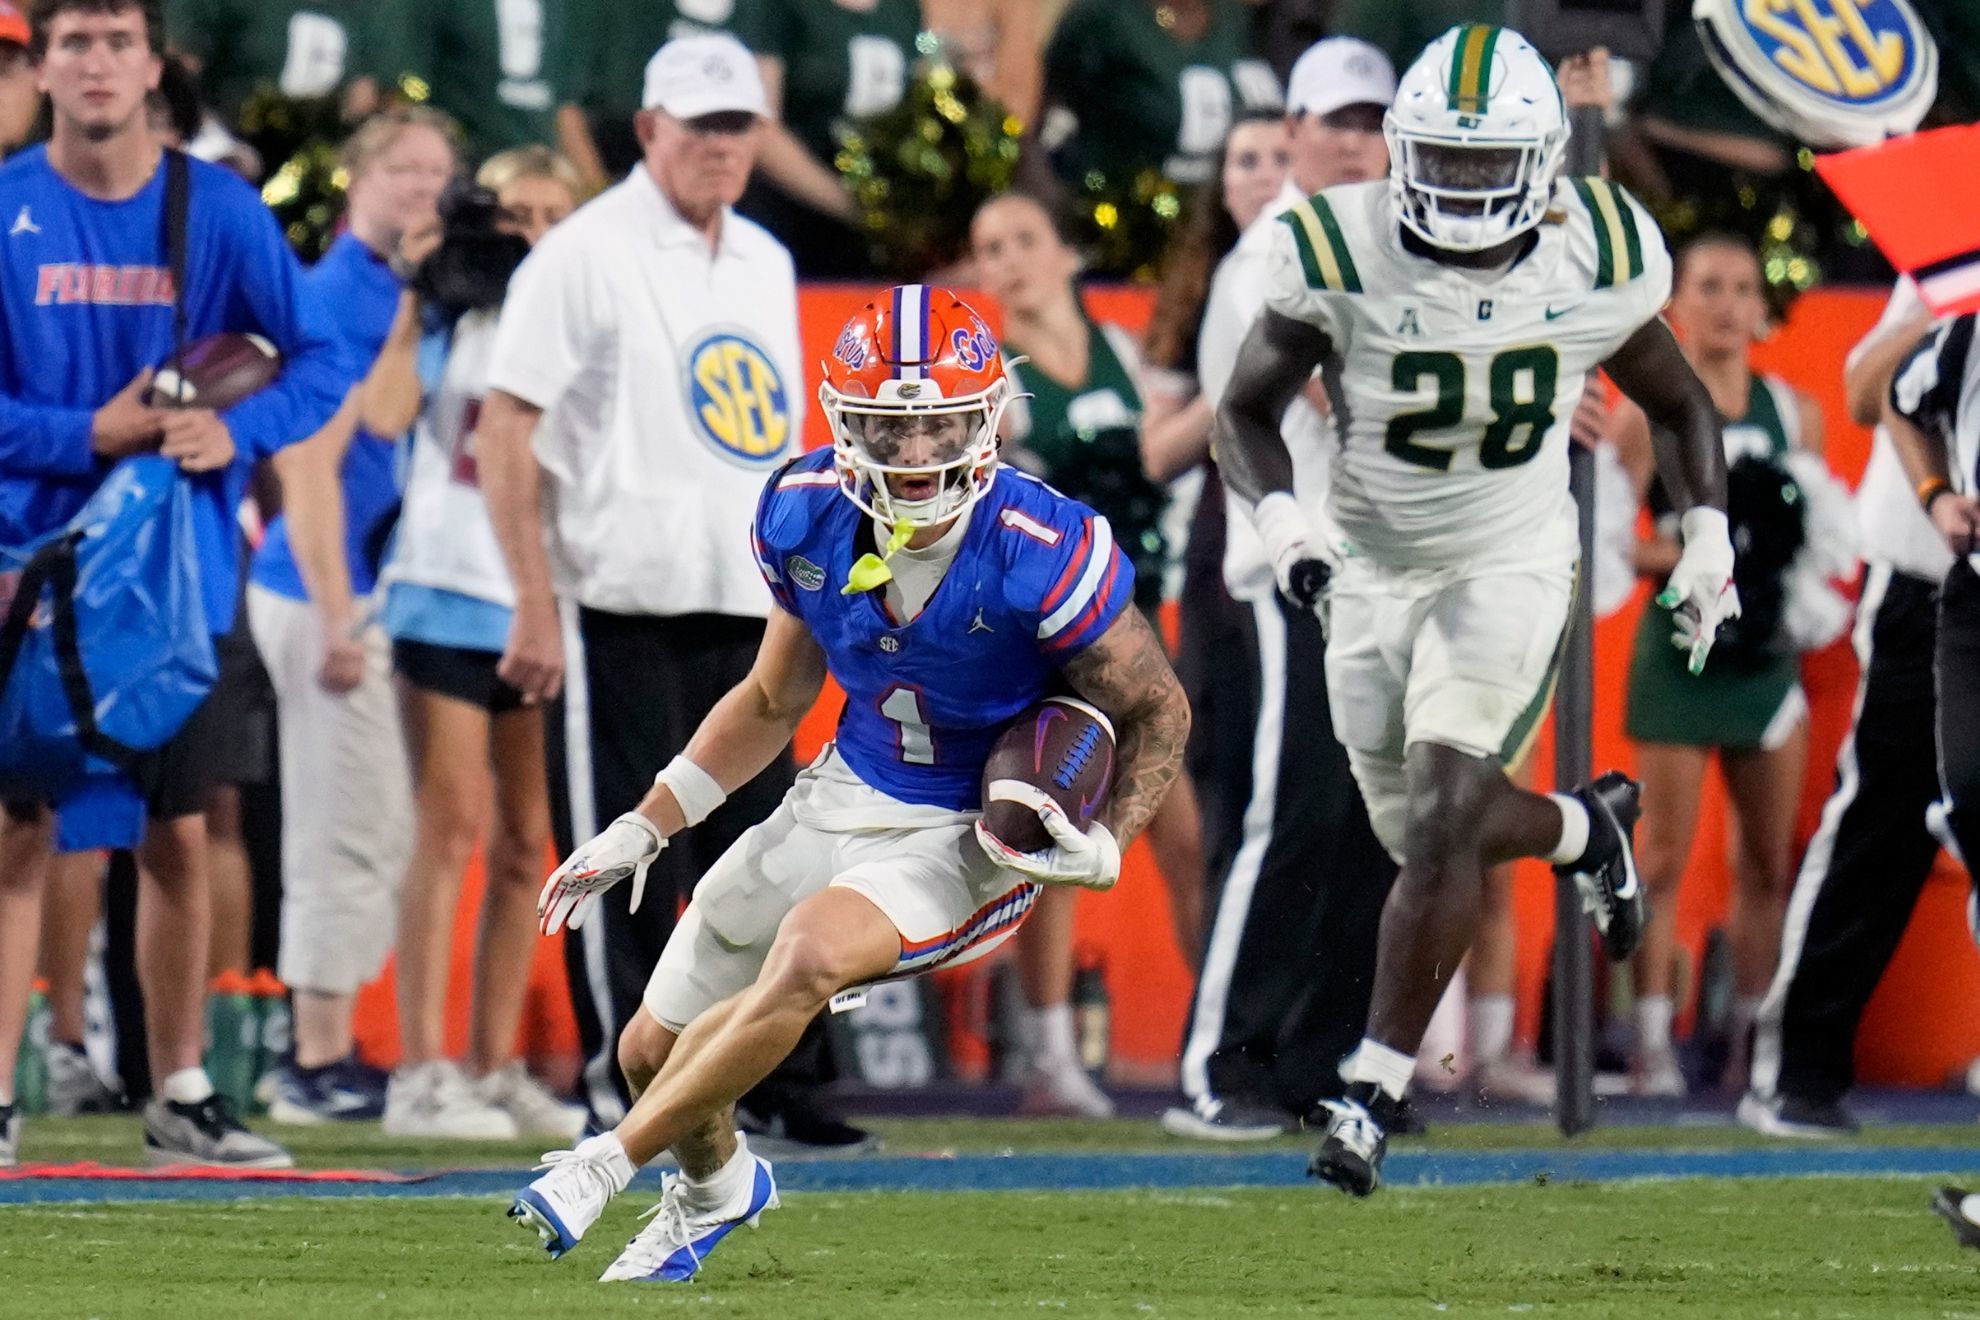 Florida Gators WR Ricky Pearsall Jr. makes one-handed catch better than OBJ's